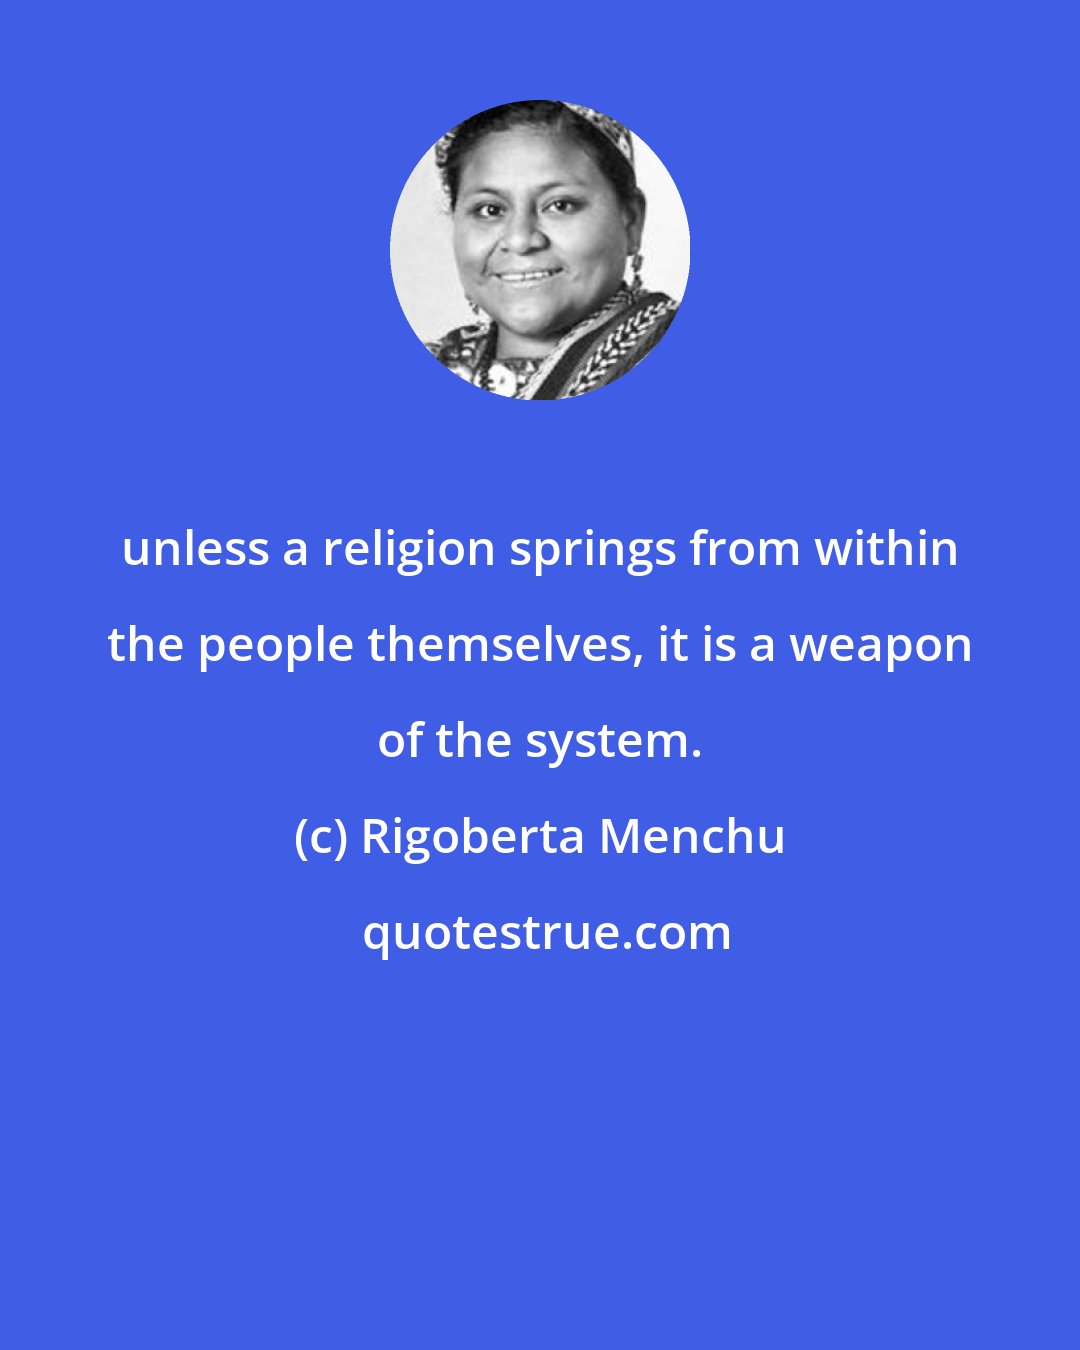 Rigoberta Menchu: unless a religion springs from within the people themselves, it is a weapon of the system.